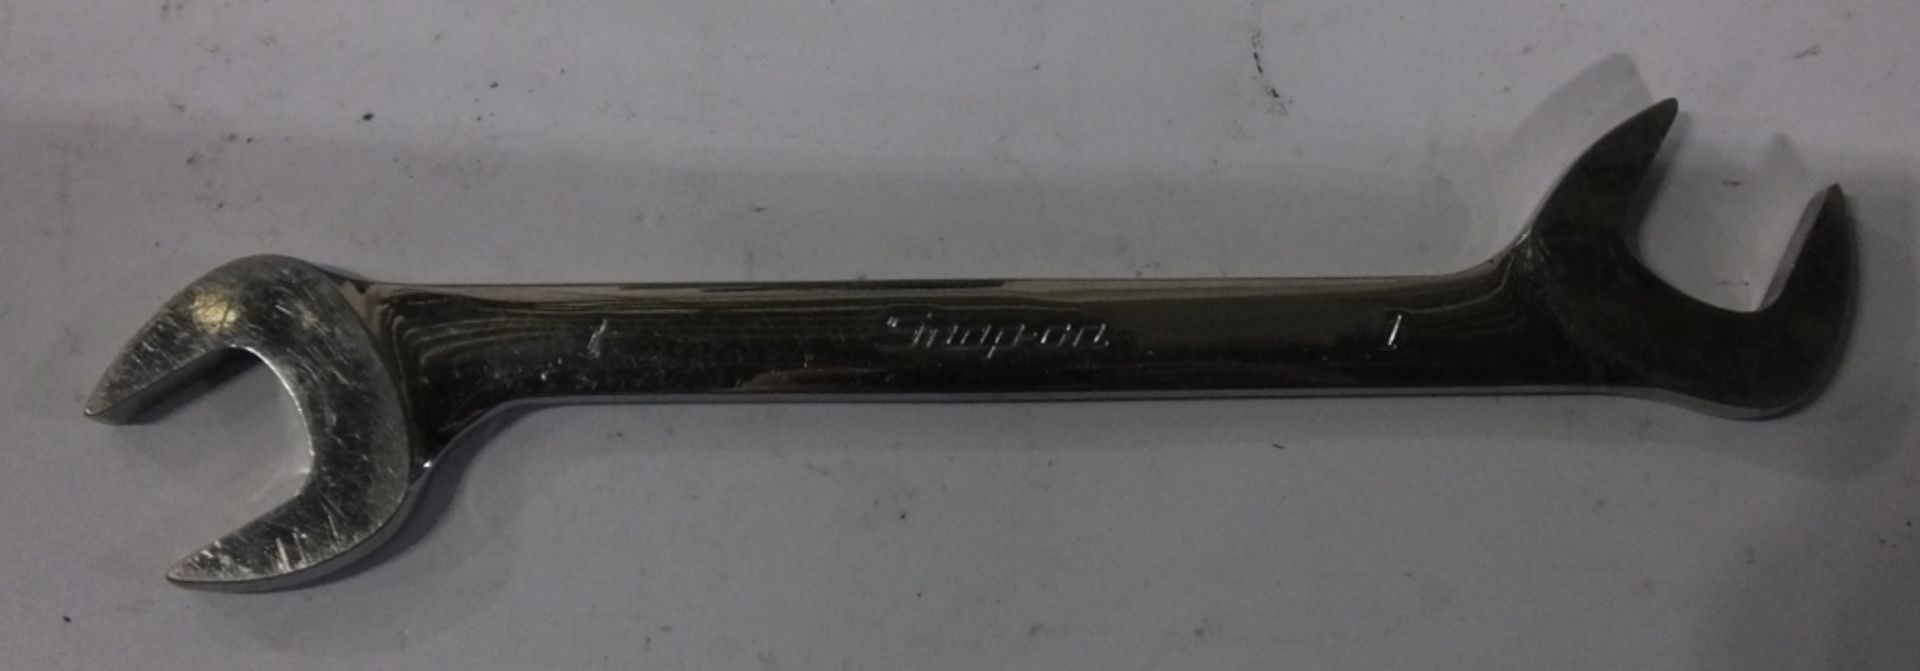 Snap-On spanner - 1